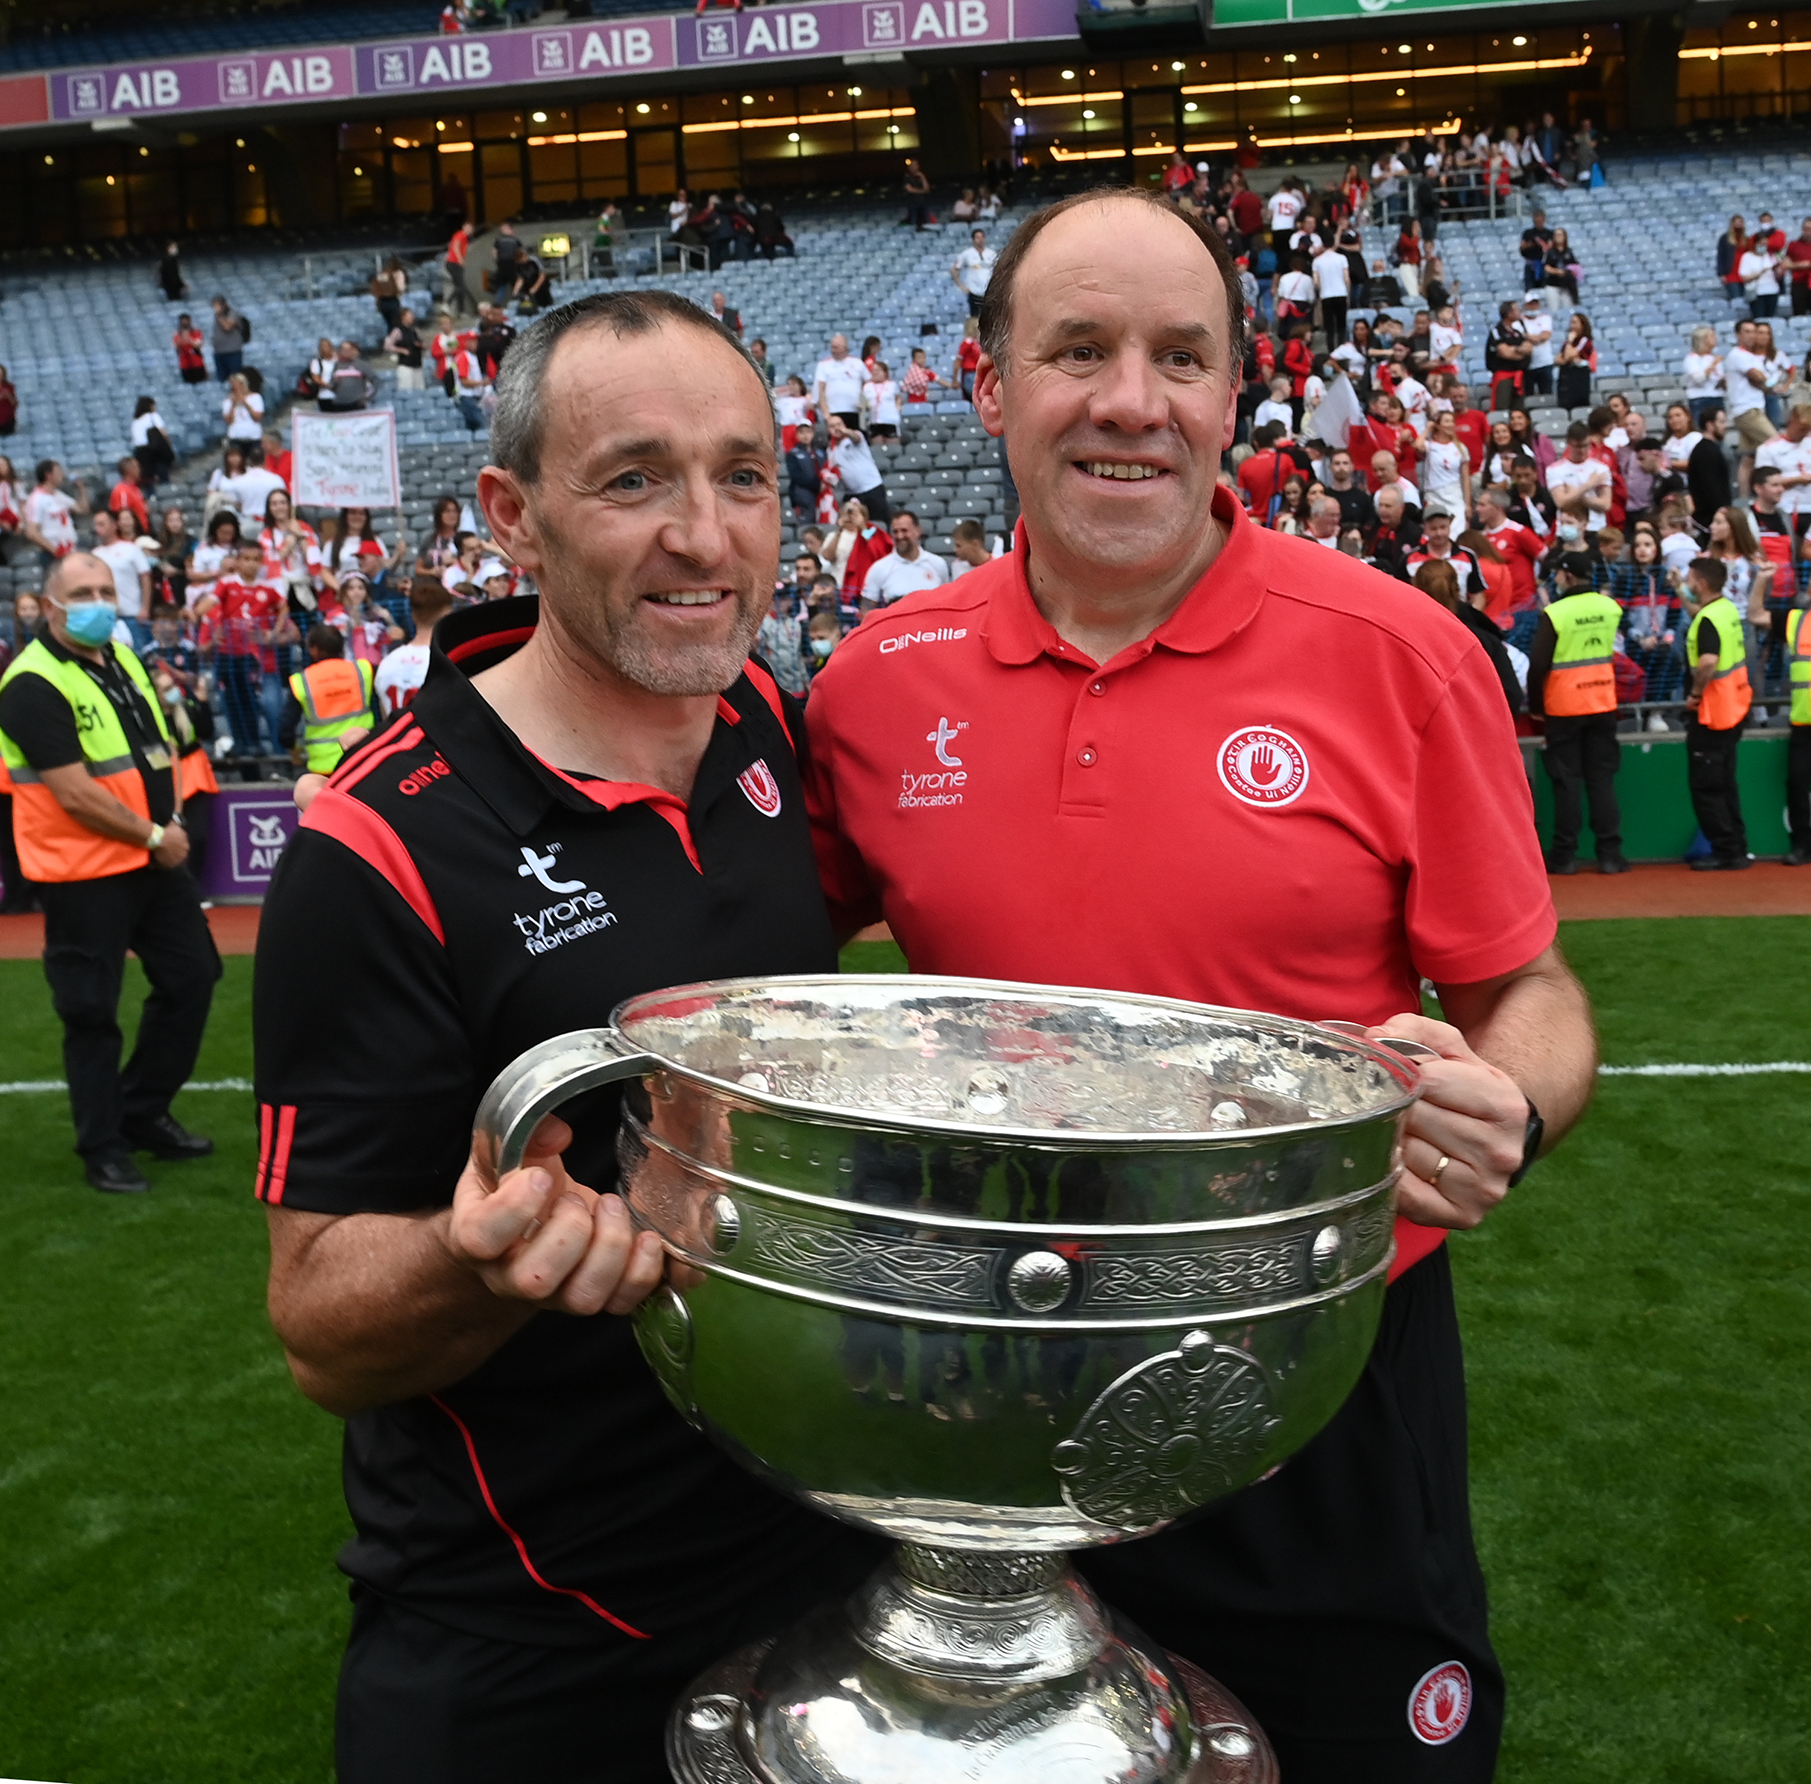 Ulster Secretary feels rivals should take inspiration from Tyrone’s success